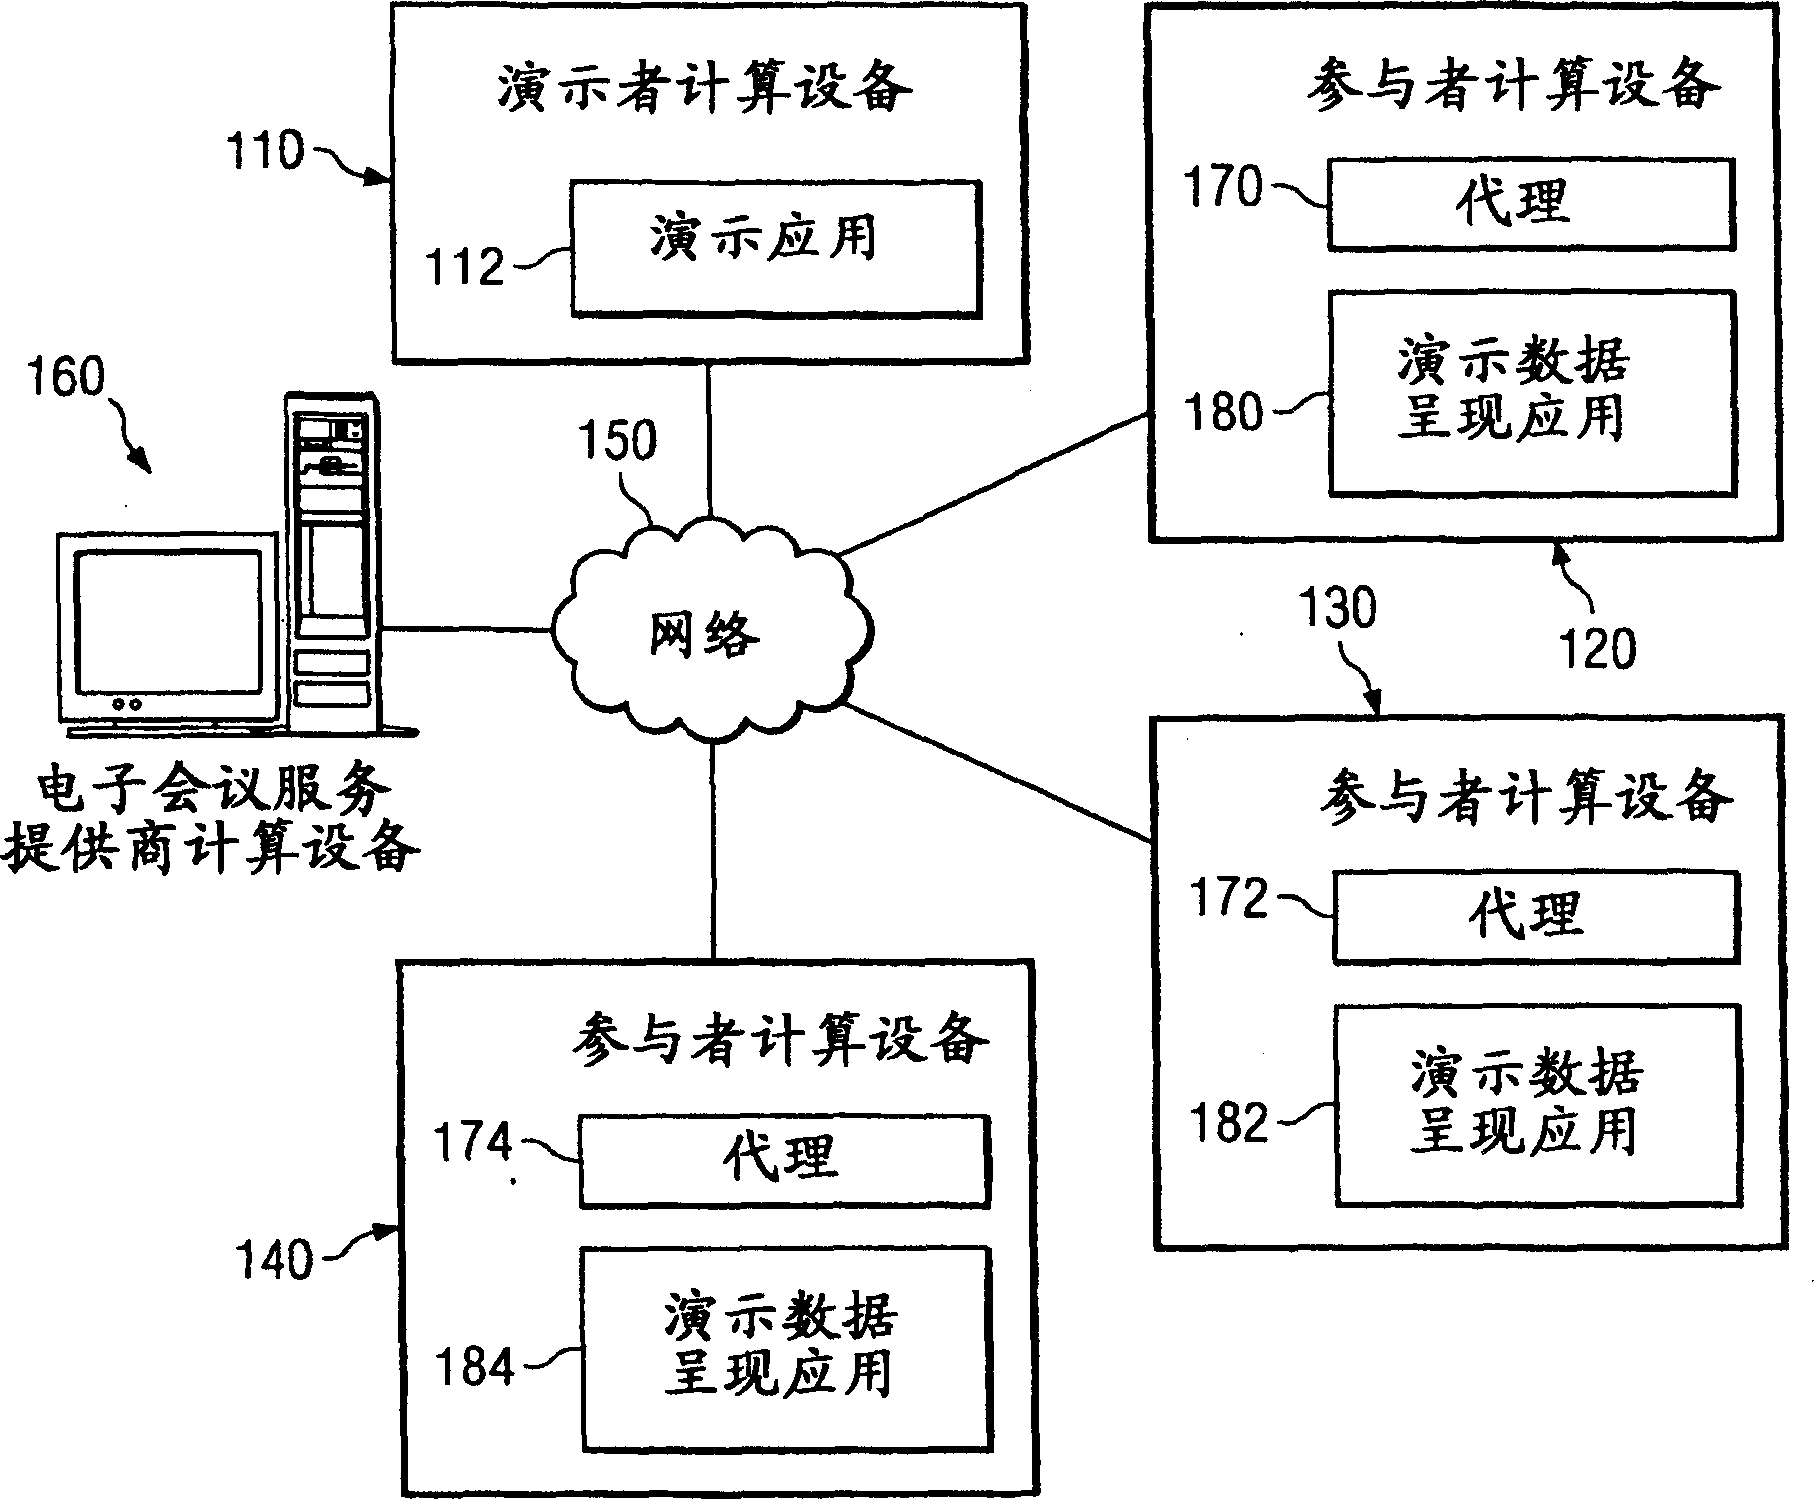 System and method for synchronizing distributed data streams for automating real-time navigation through presentation slides